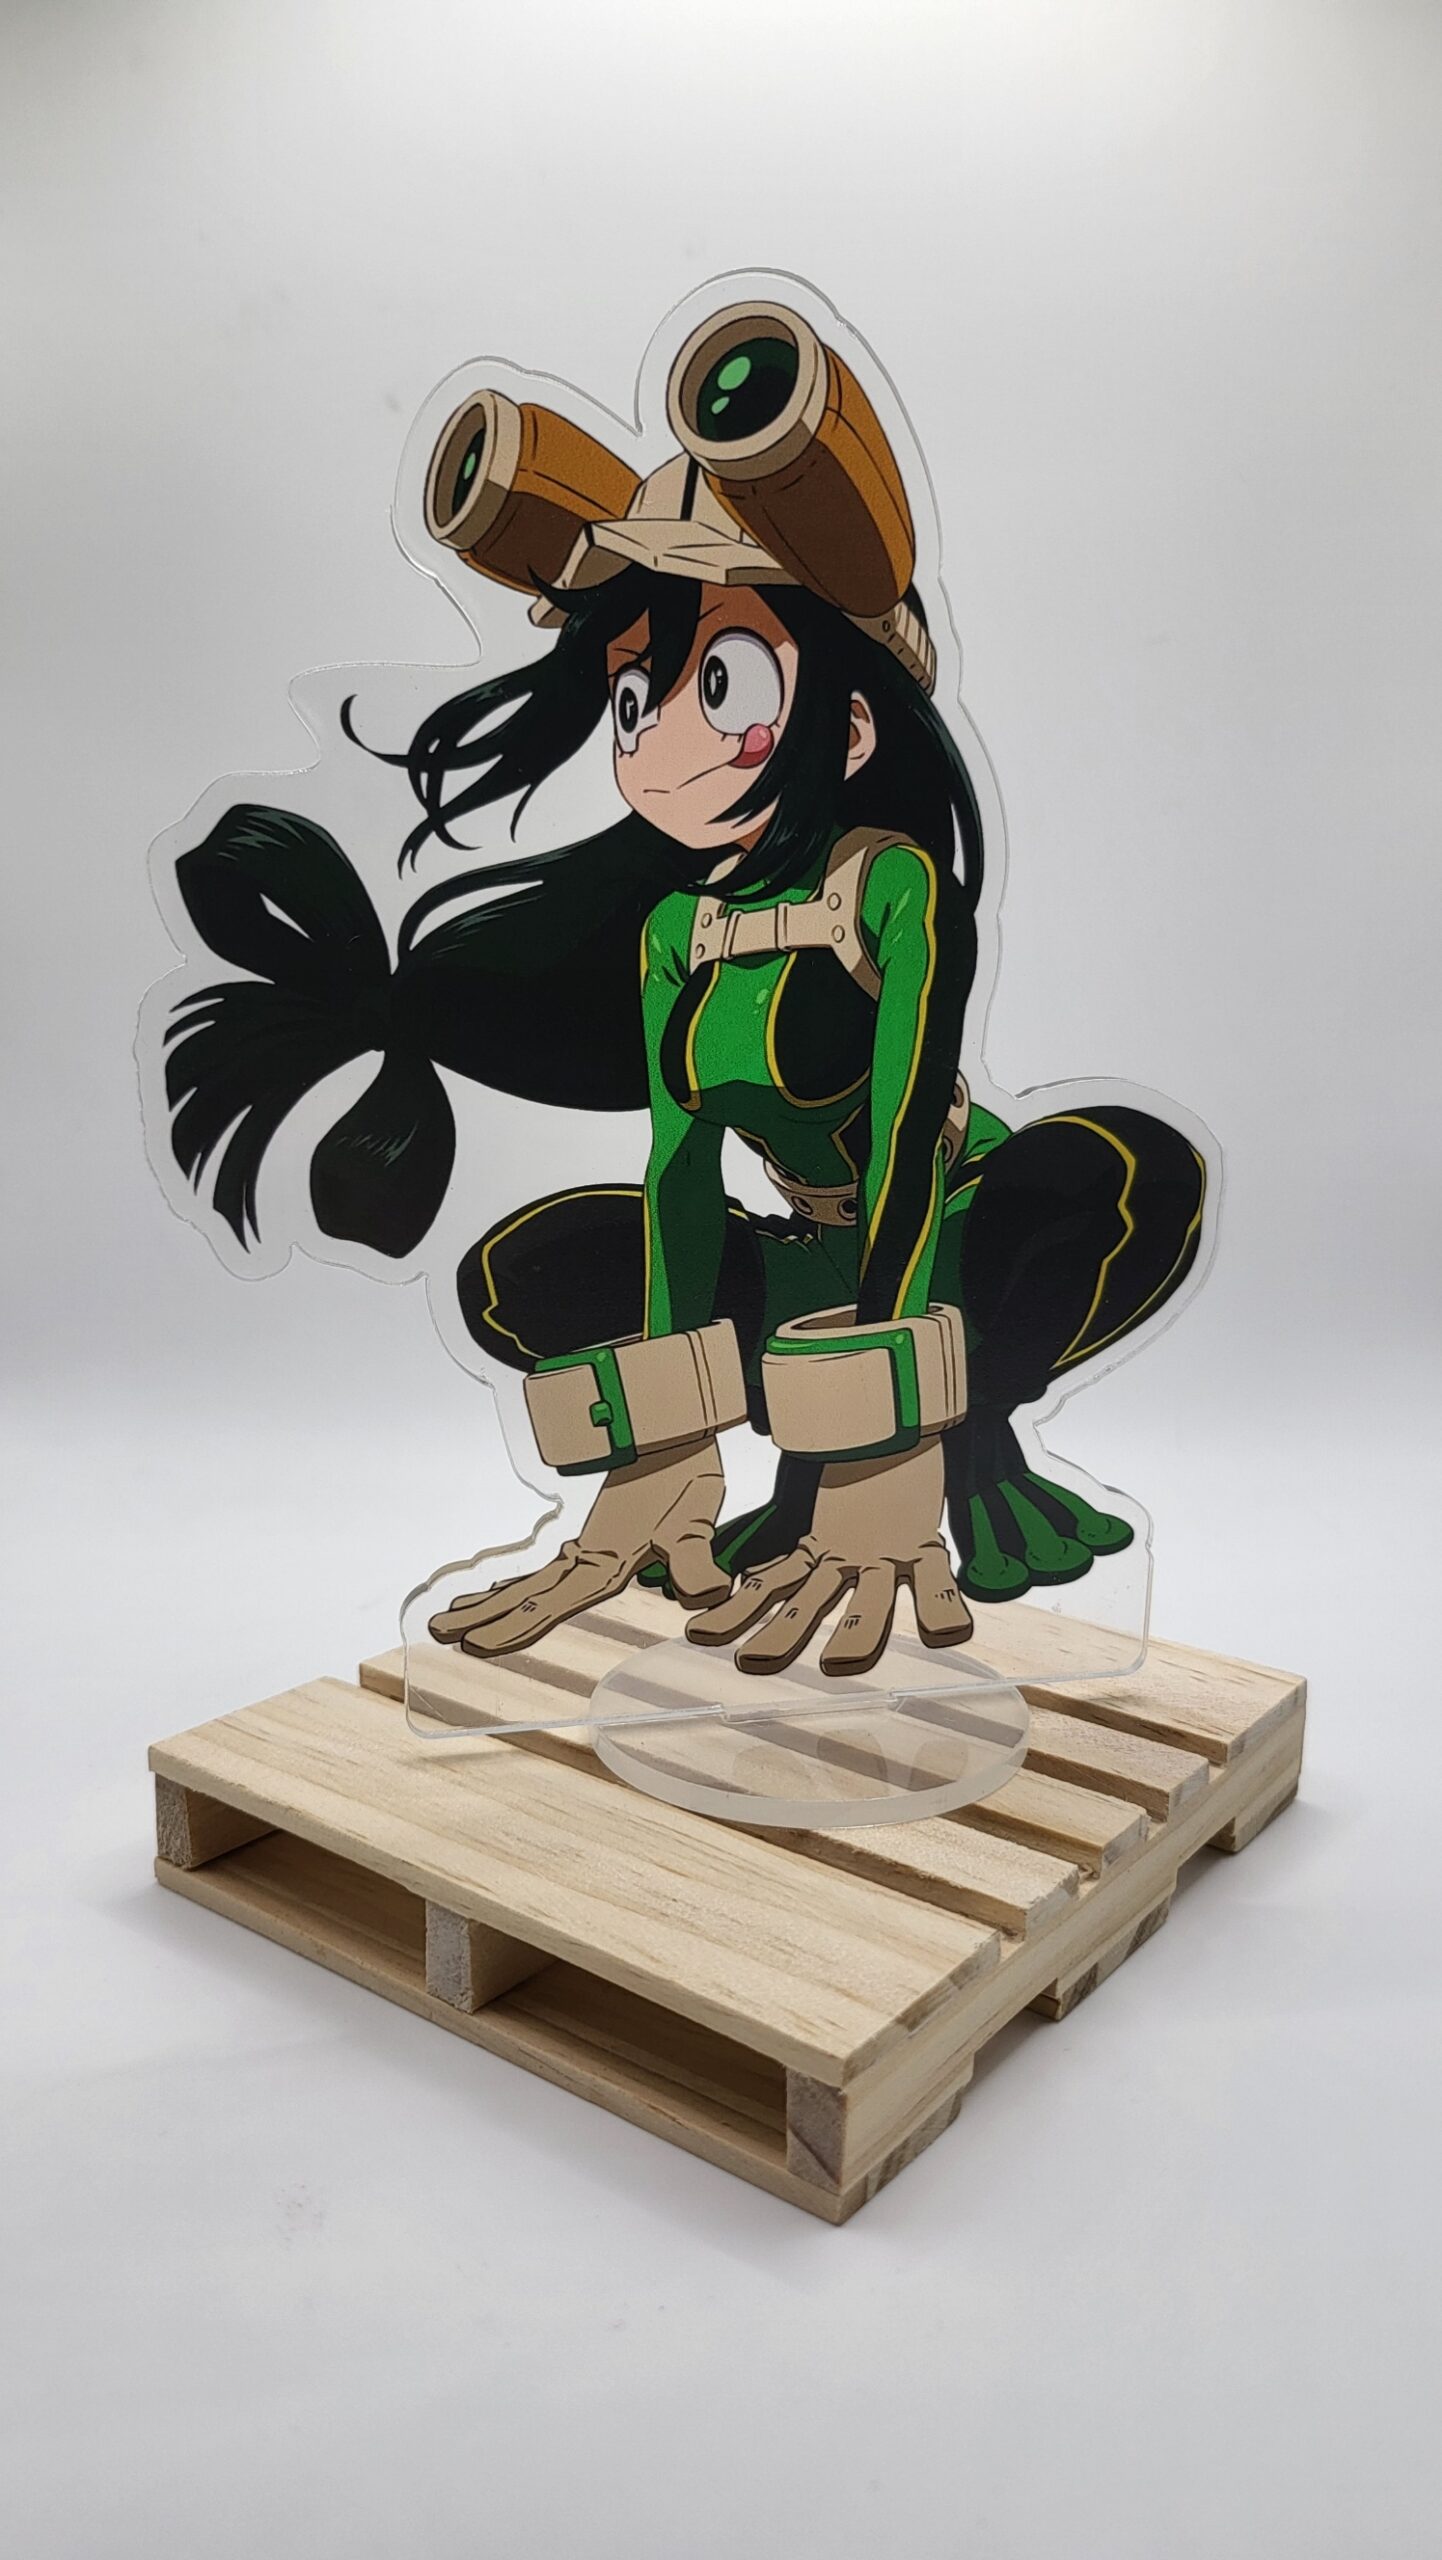 alma barrios recommends sue from my hero academia pic